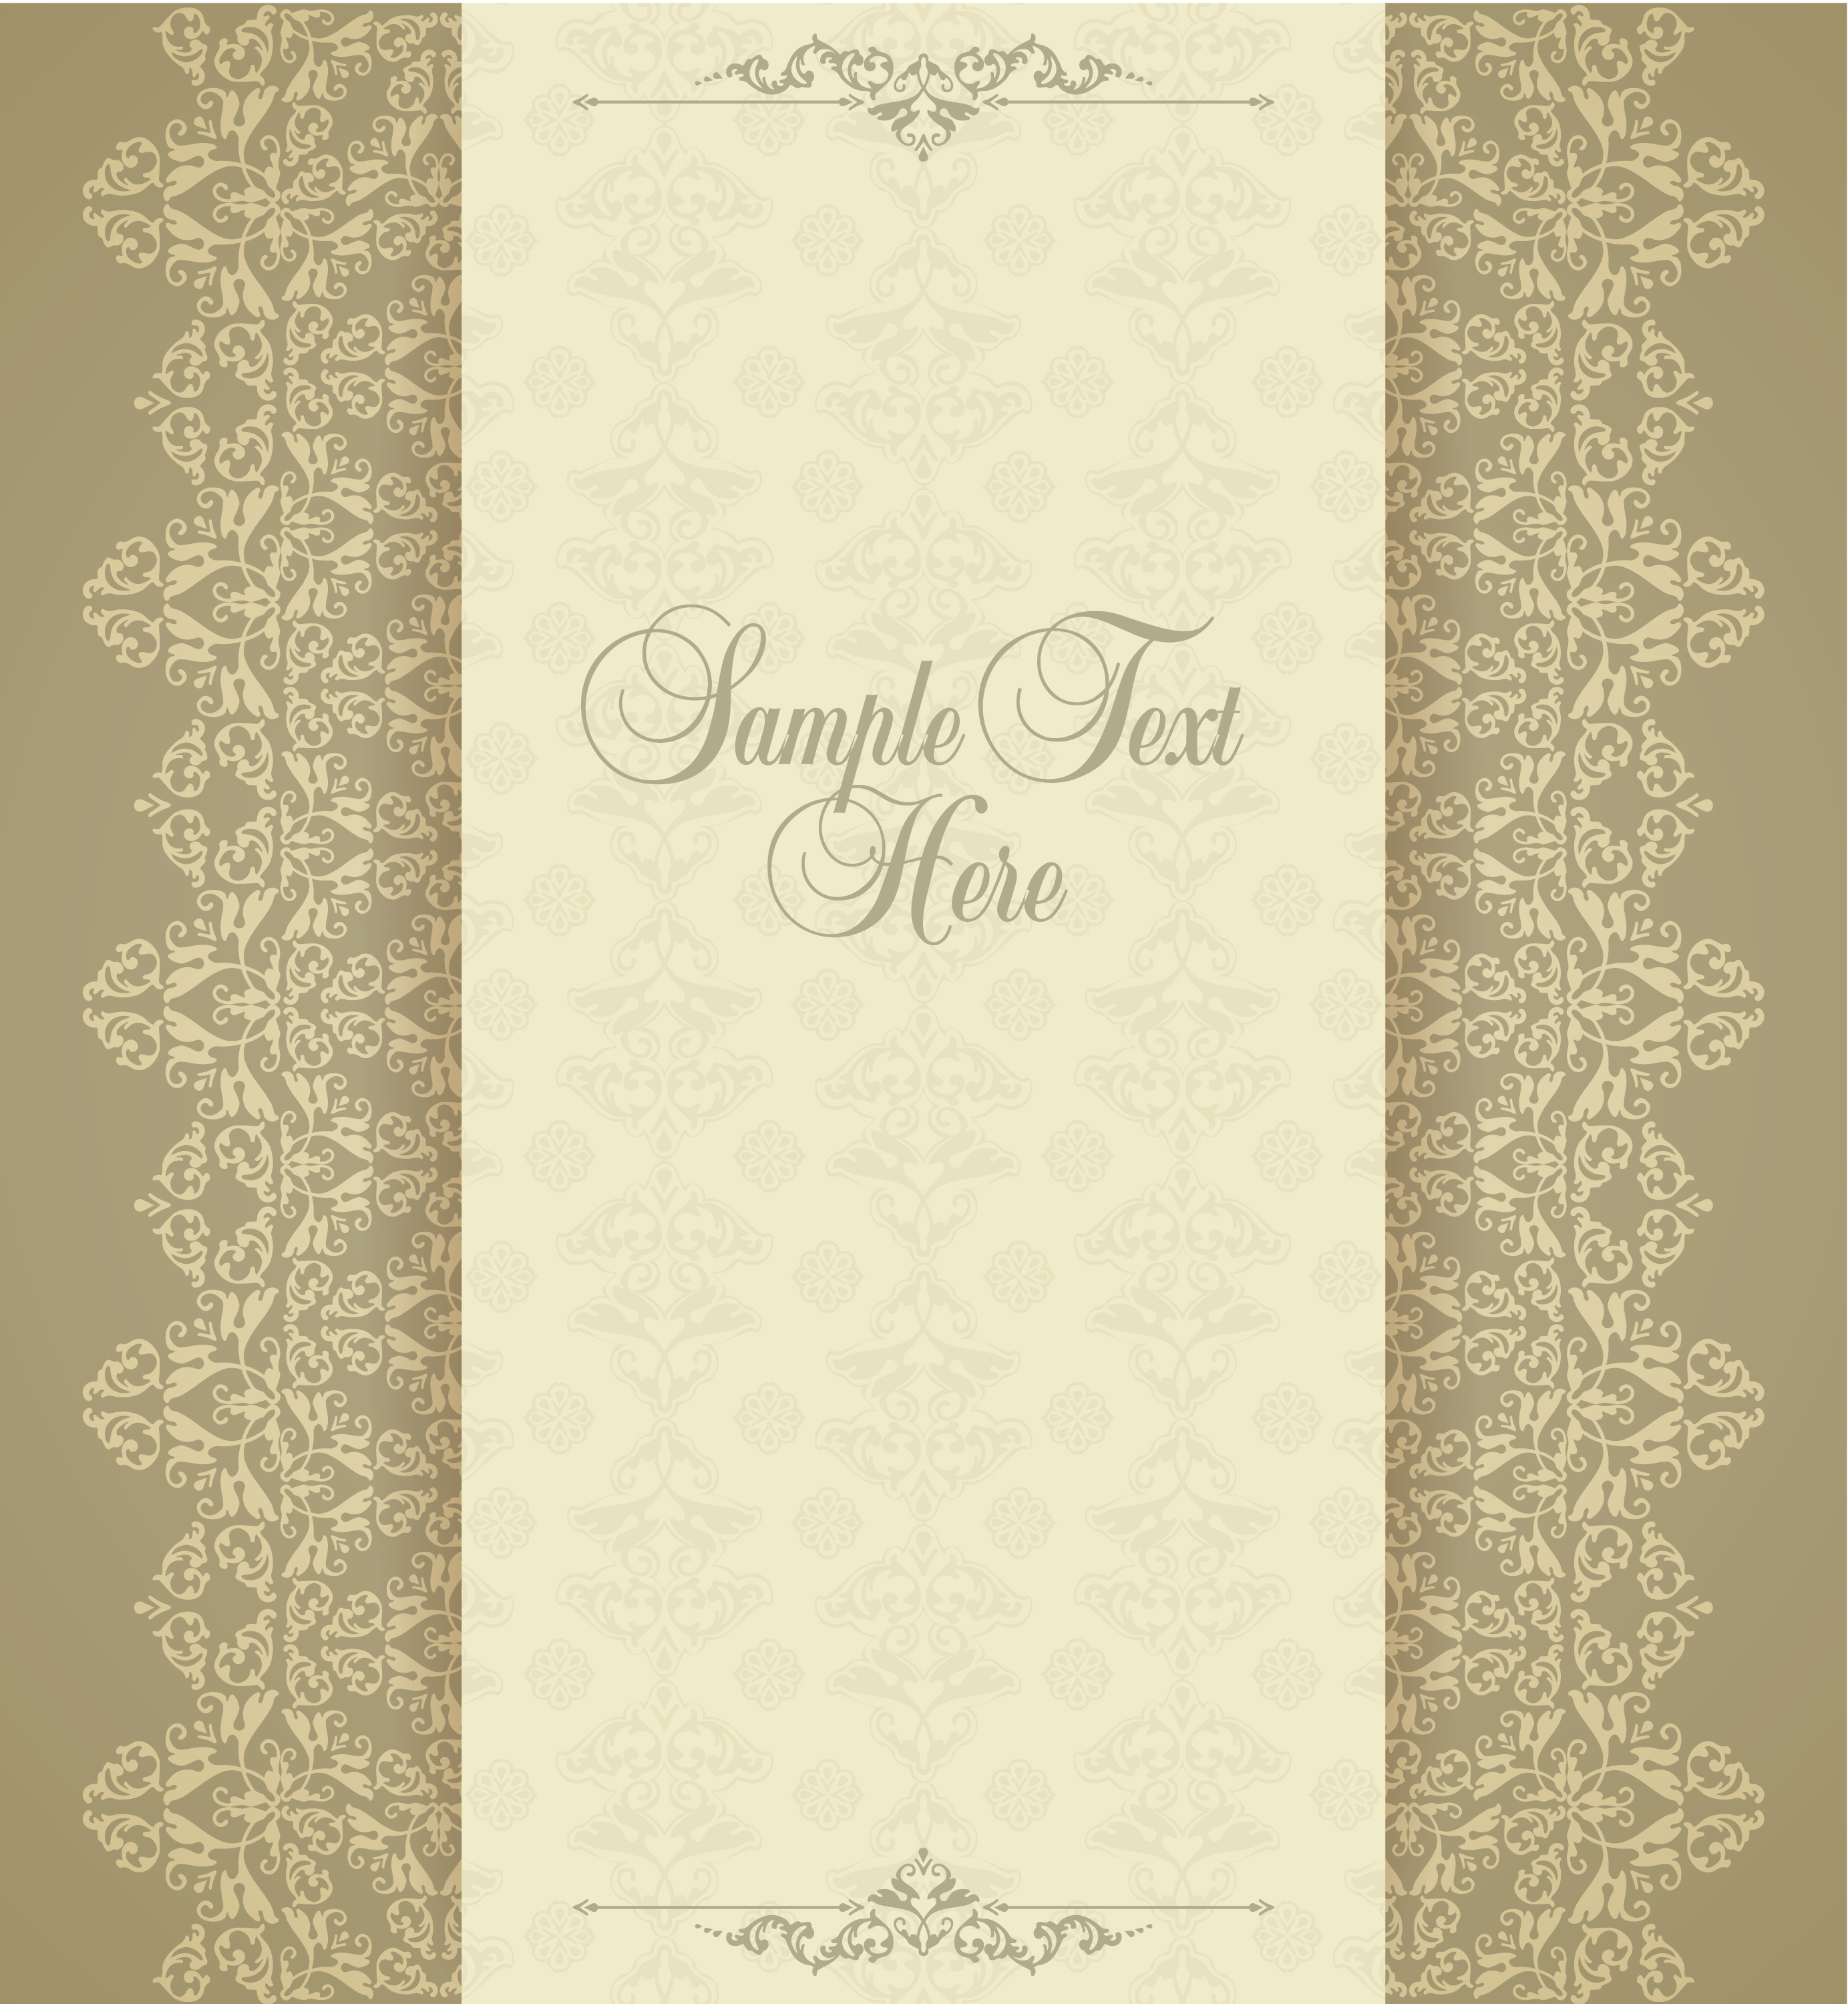 Design template in vintage style Photoshop brush